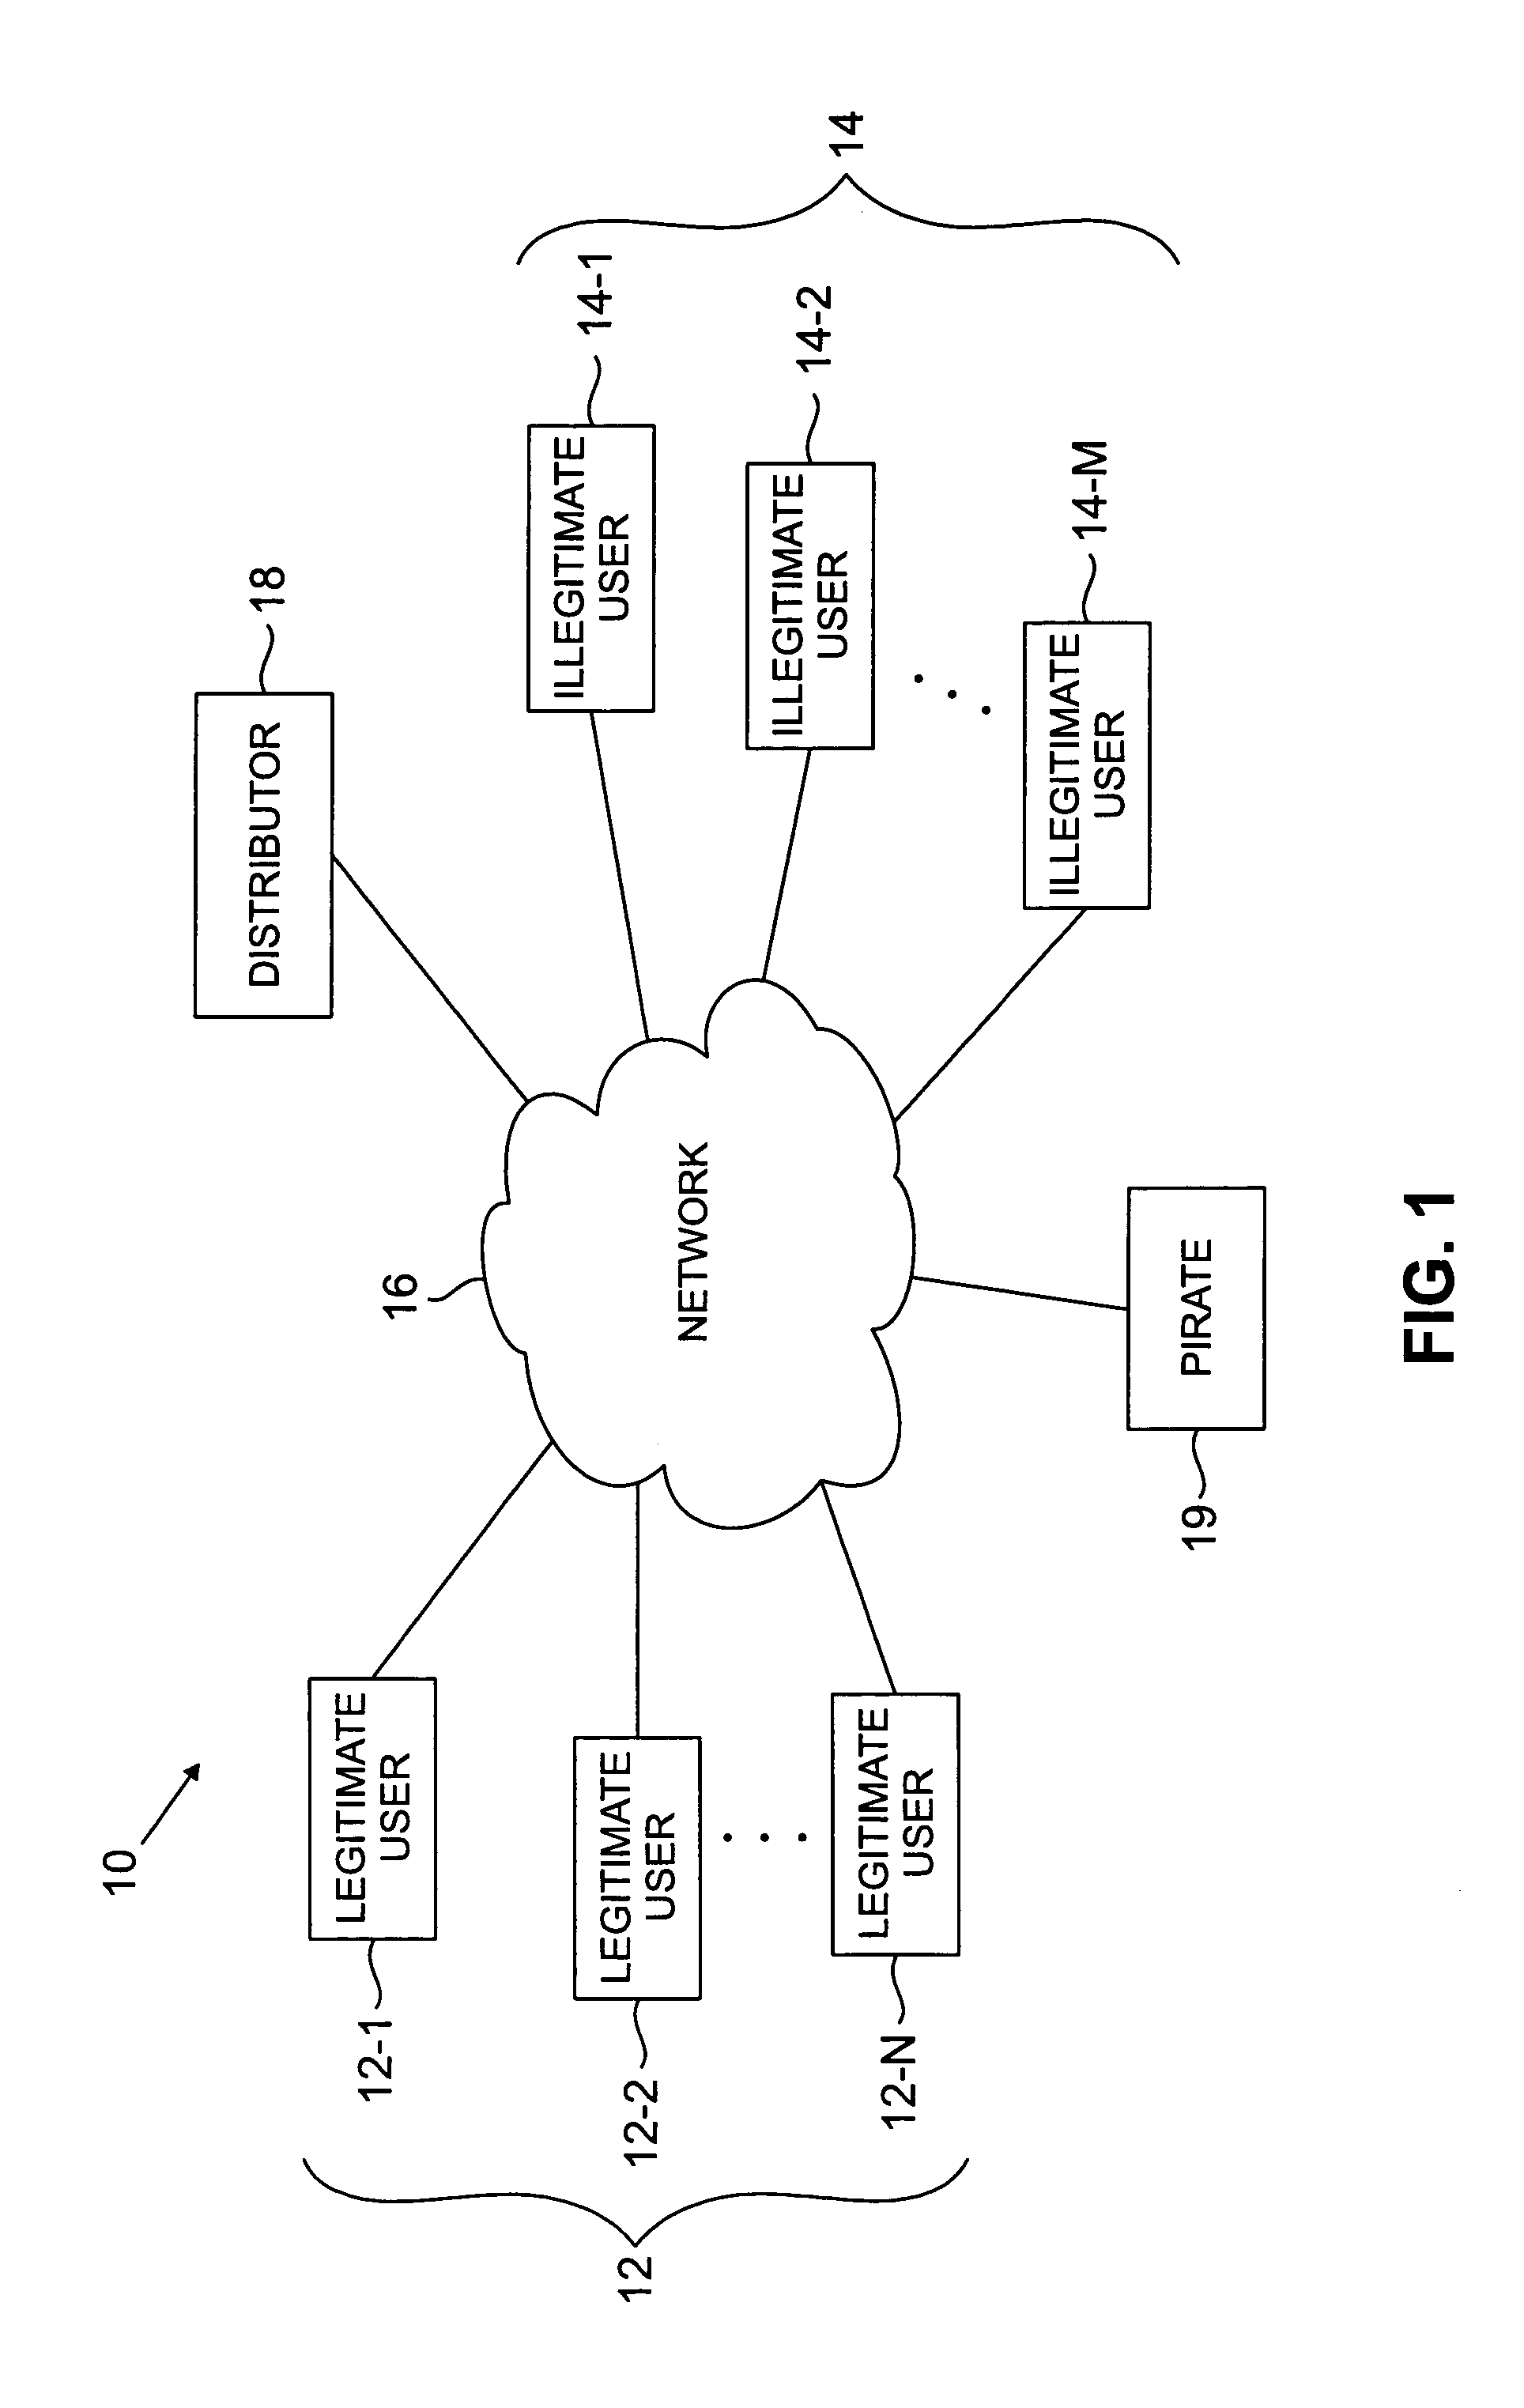 Software aging method and apparatus for discouraging software piracy